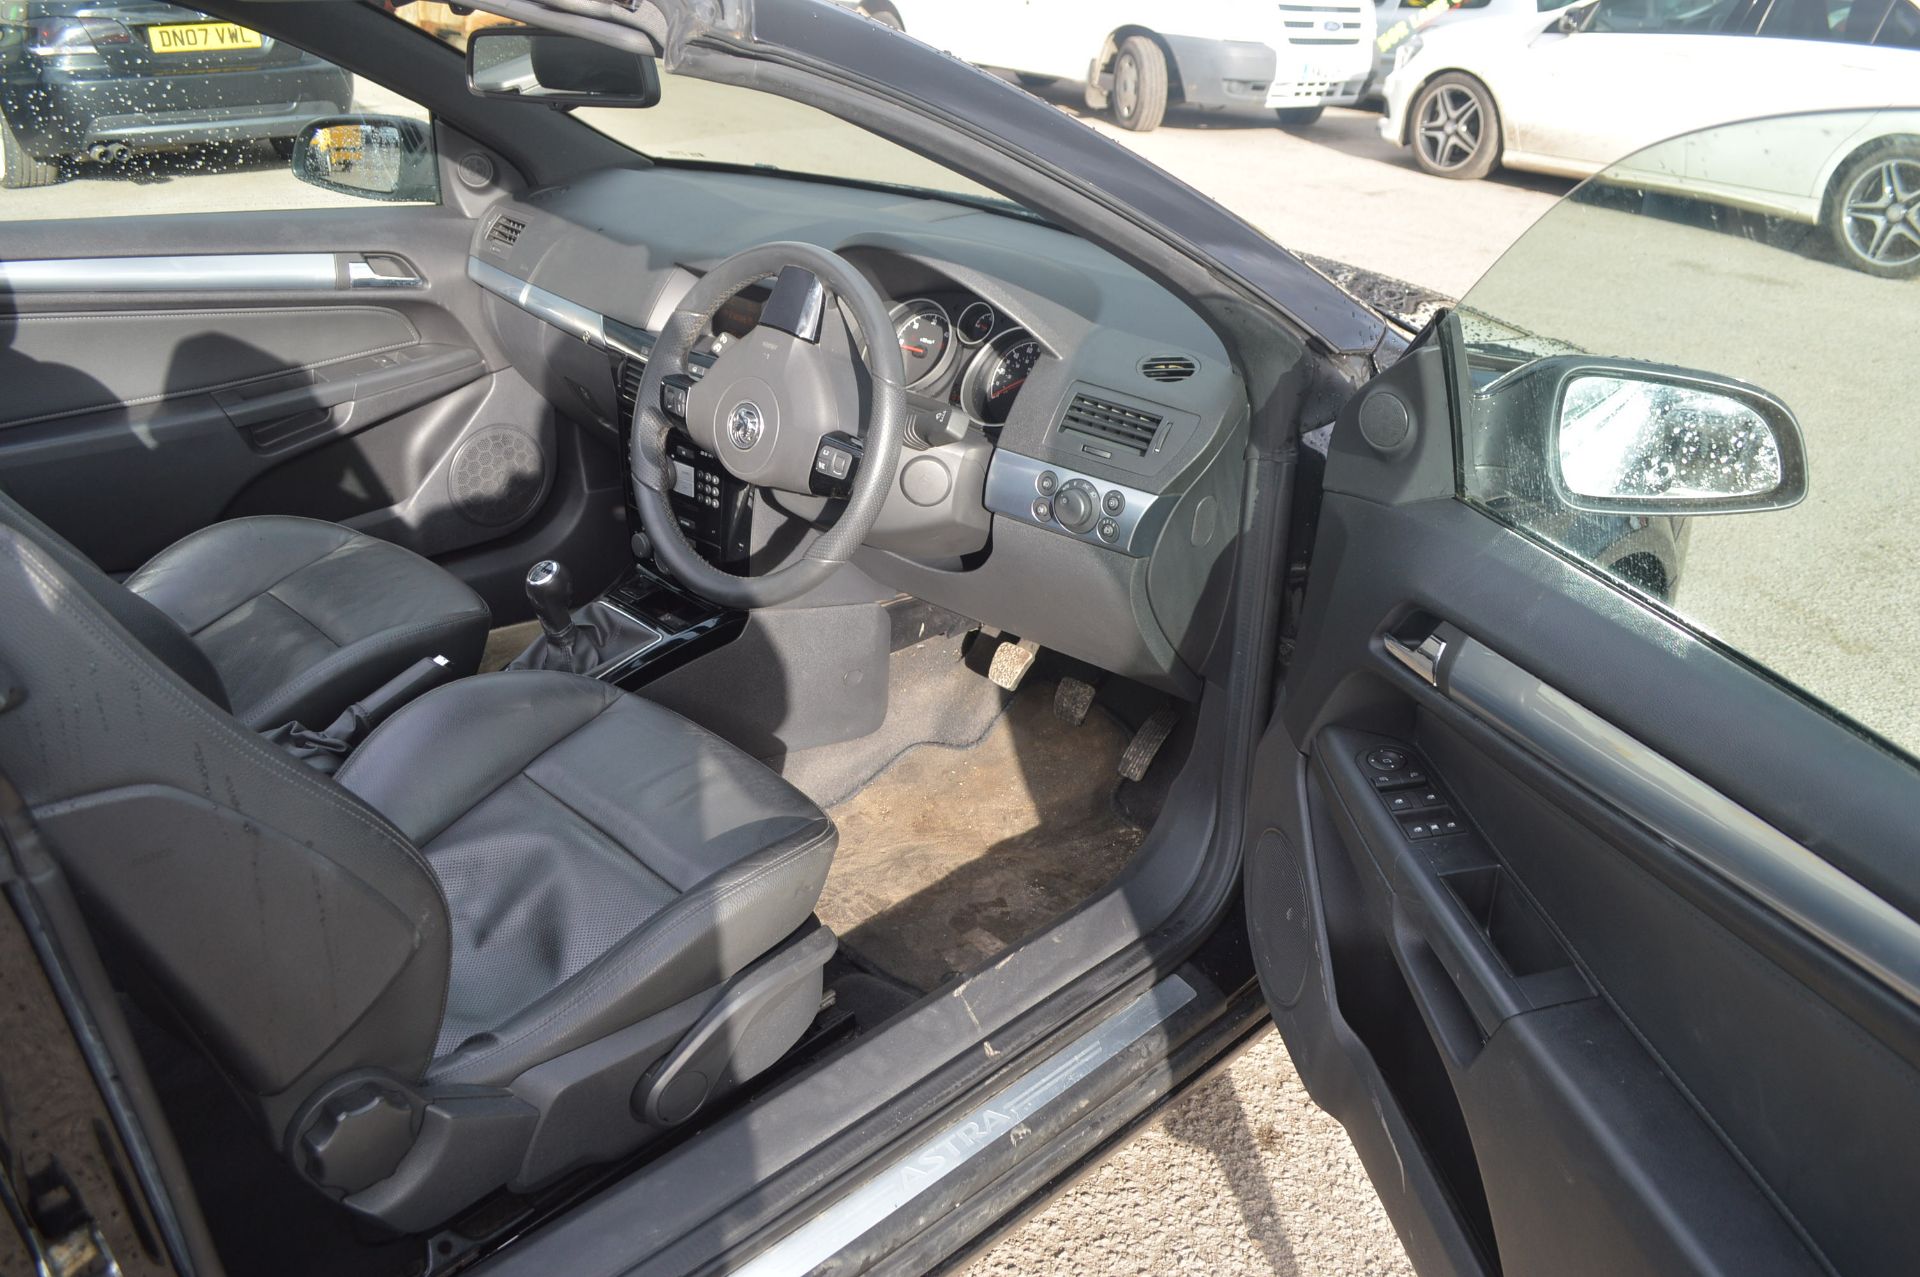 K - 2008/08 REG VAUXHALL ASTRA T-TOP DESIGN CDTI - ROOF CAN BE PUT DOWN/UP WITH THE KEY   DATE OF - Image 11 of 20